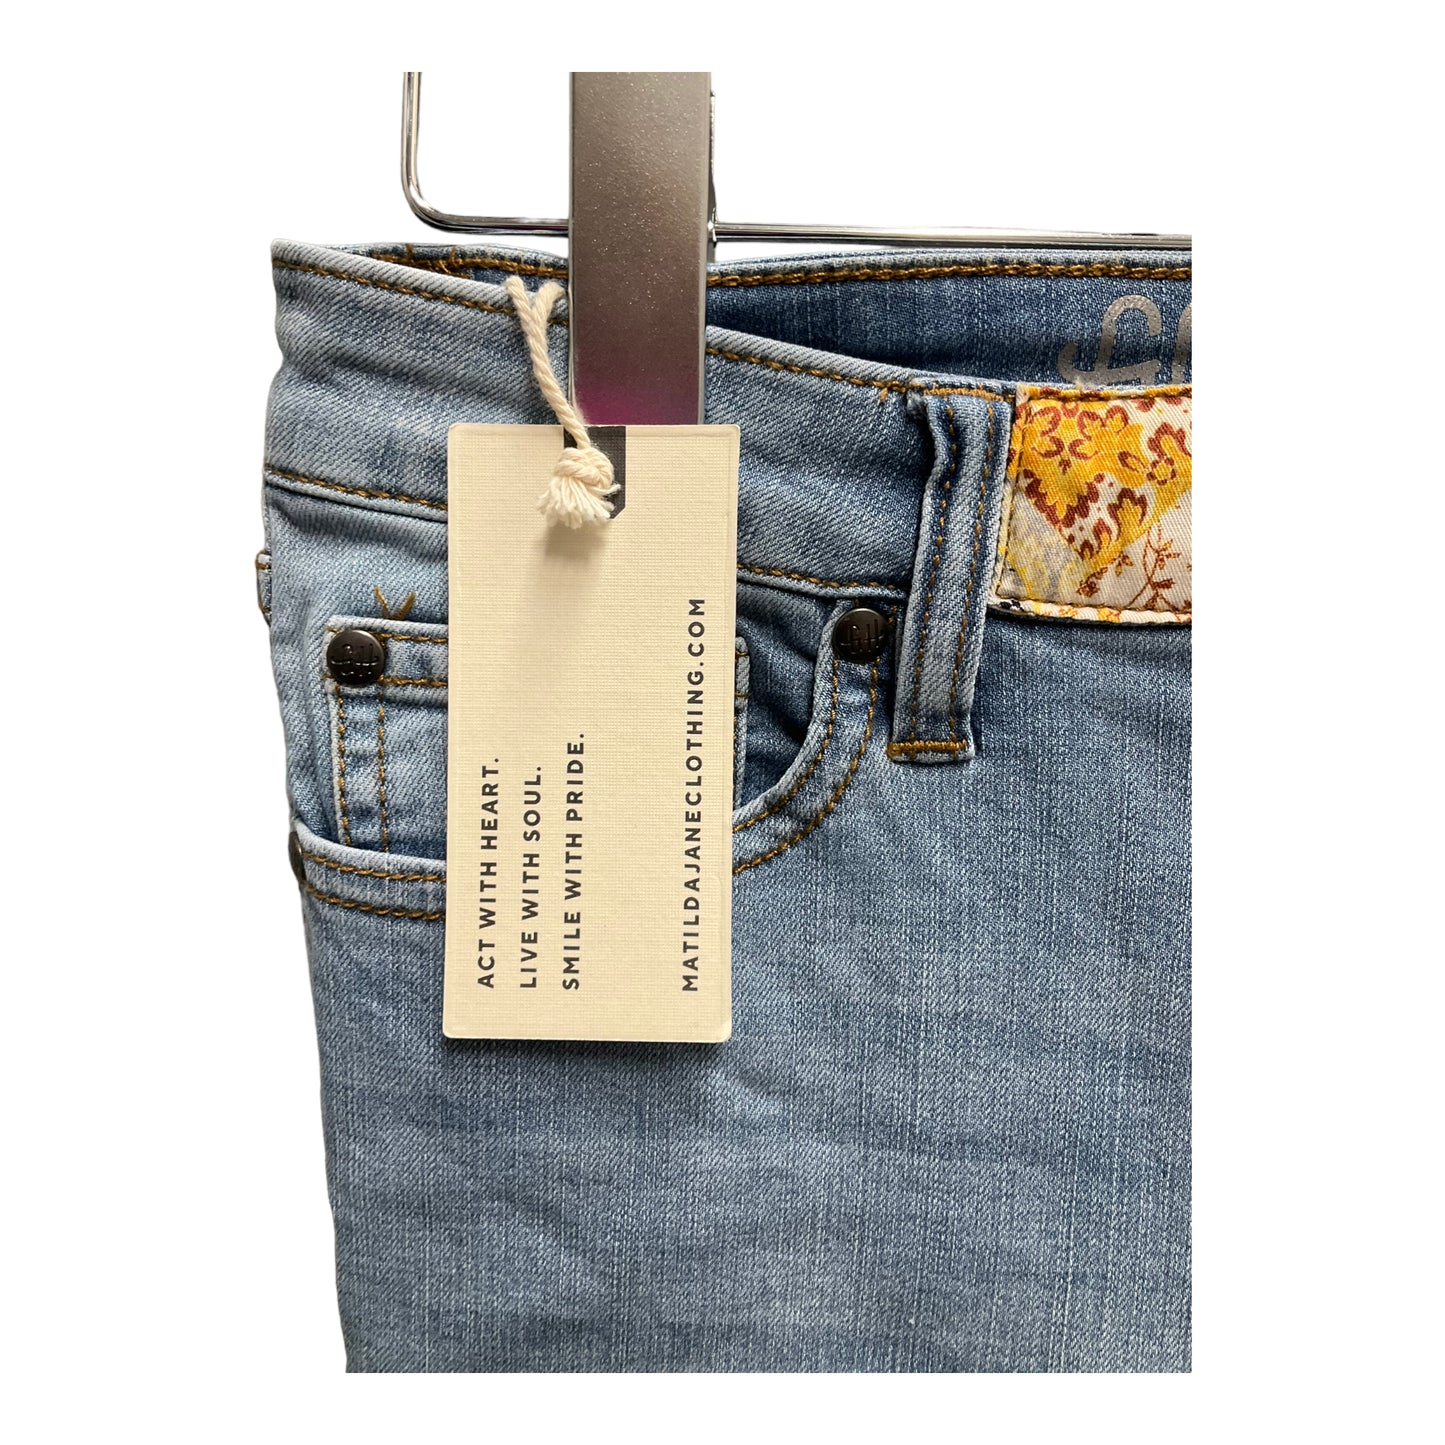 Jeans Straight By Matilda Jane  Size: 6